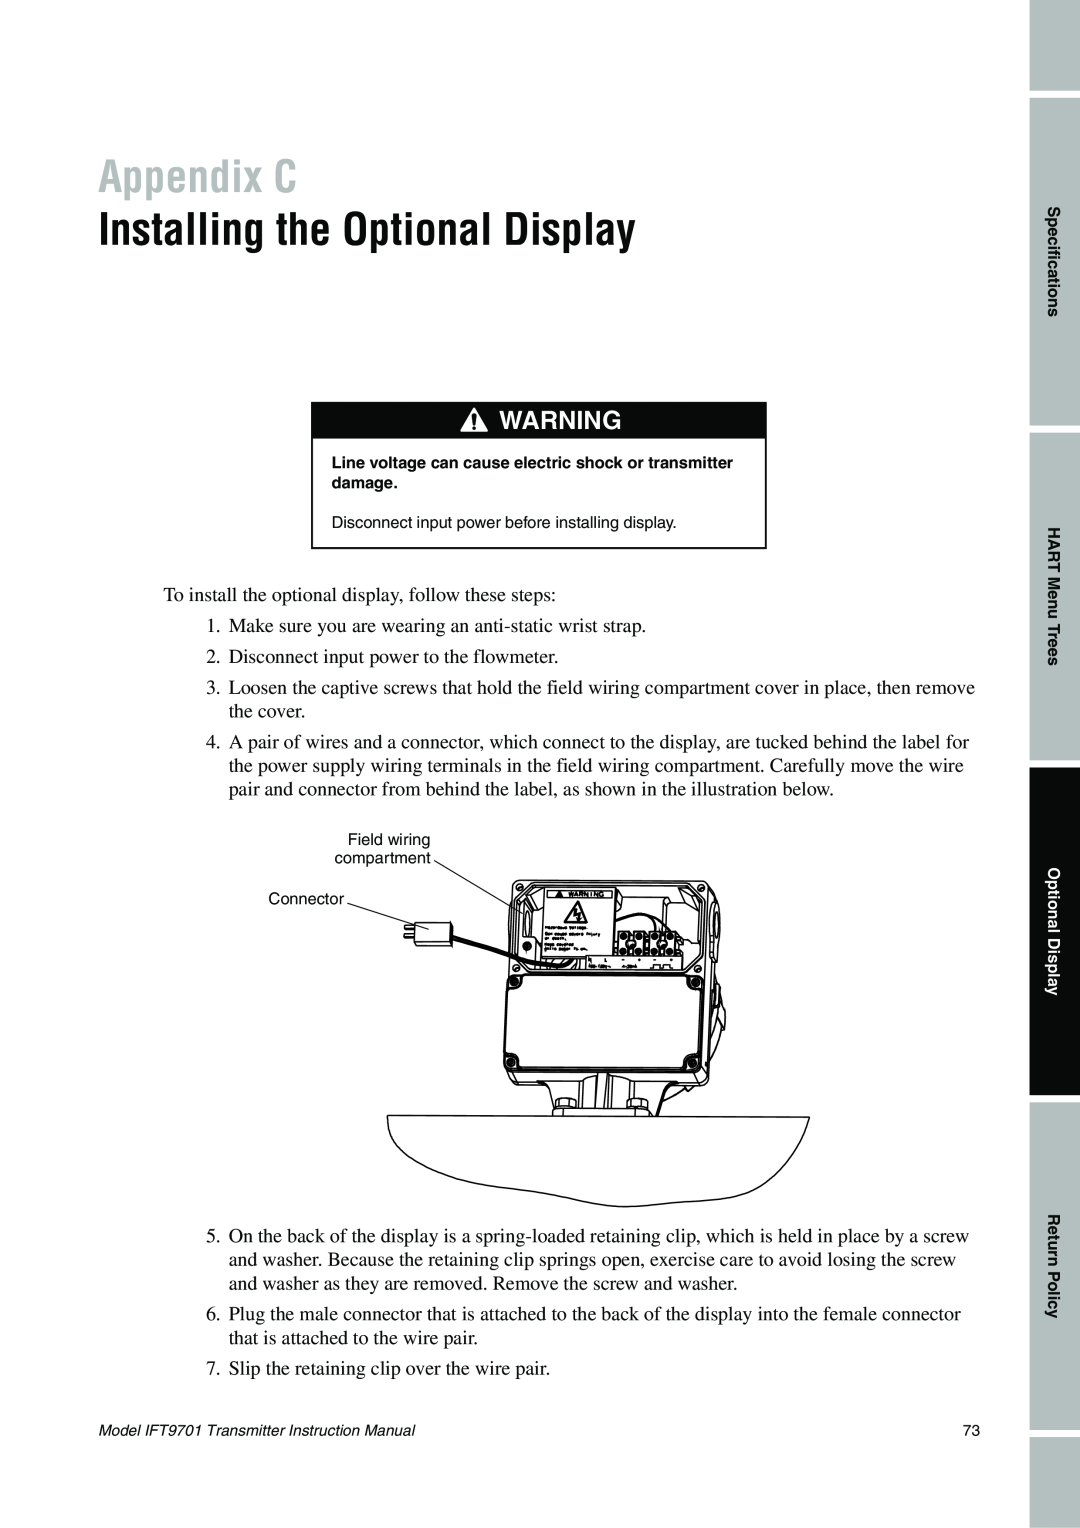 Emerson IFT9701 instruction manual Appendix C, Installing the Optional Display 